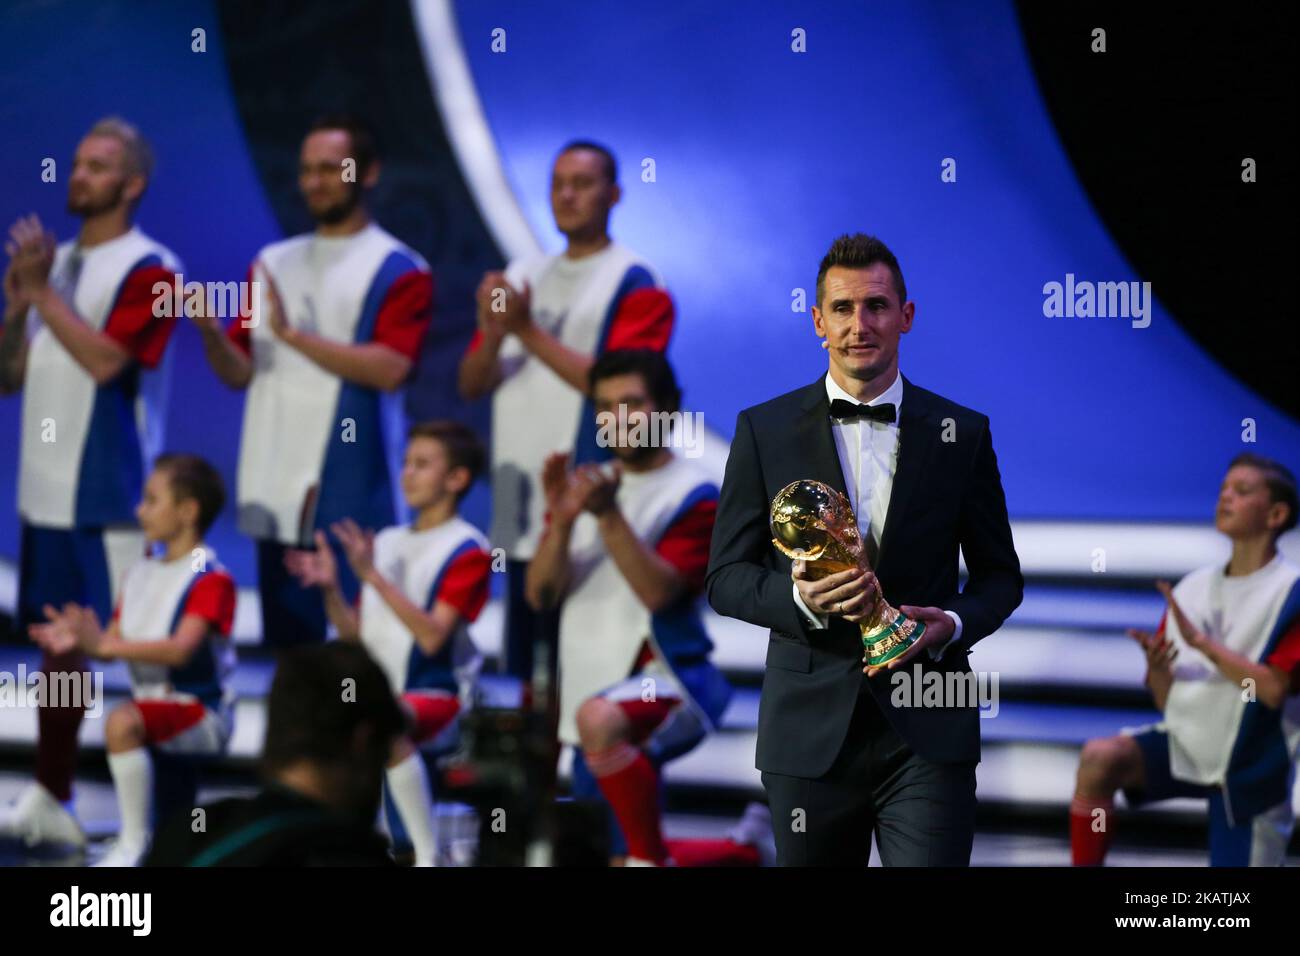 Miroslav Klose holds the World Cup trophy on stage before the Final Draw for the 2018 FIFA World Cup at the State Kremlin Palace on December 01, 2017 in Moscow, Russia. (Photo by Igor Russak/NurPhoto) Stock Photo